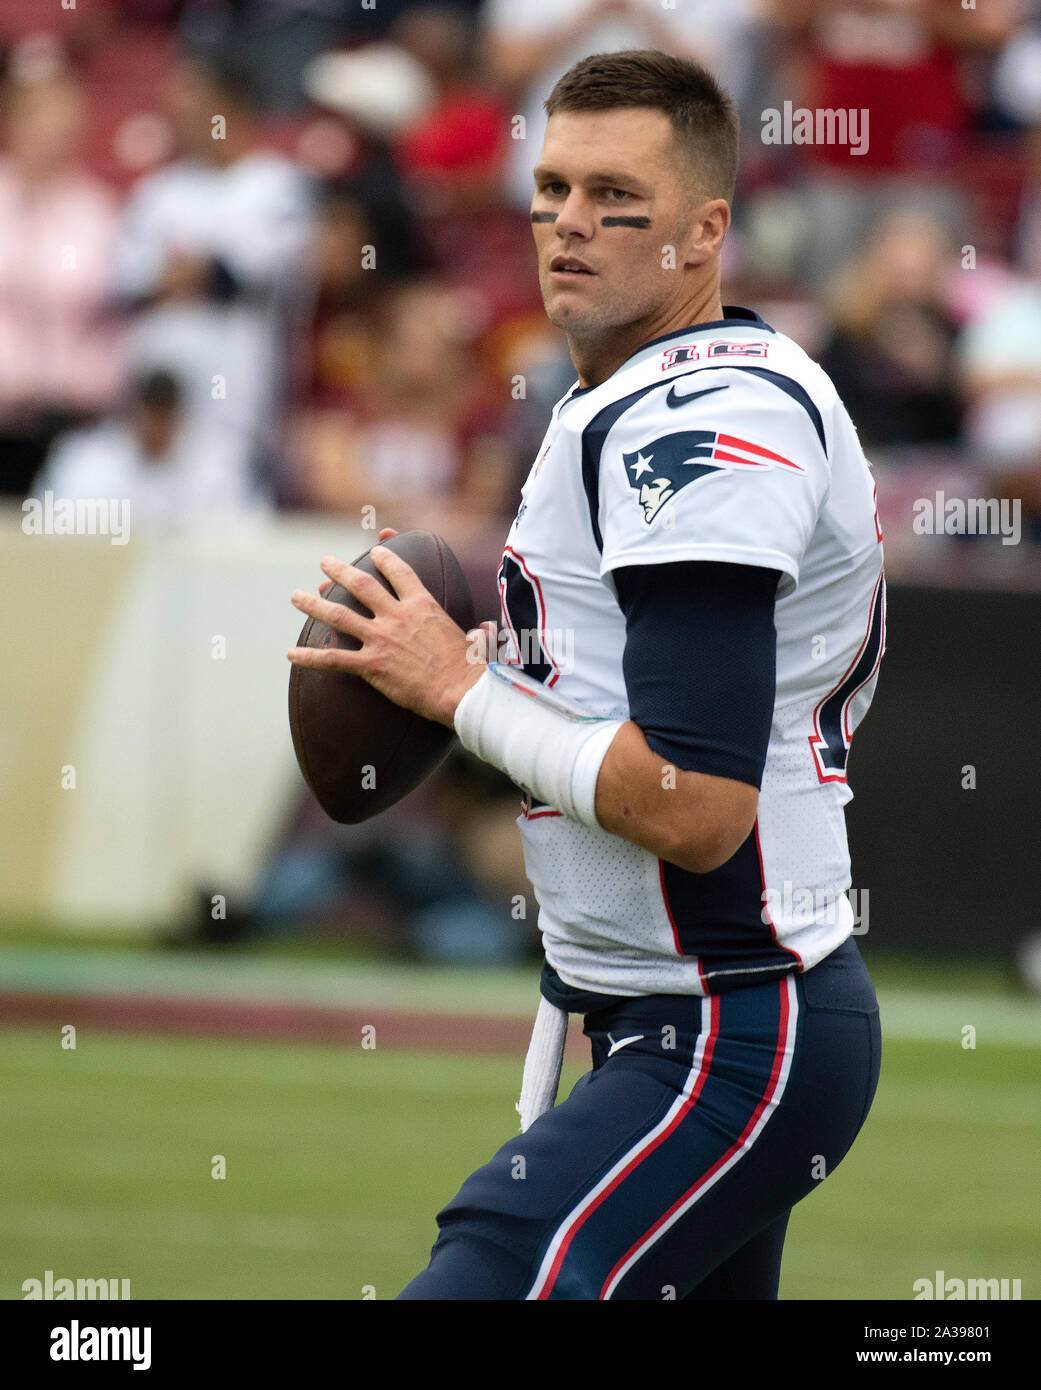 New England Patriots quarterback Tom Brady (12) warms-up prior to the game against the Washington Redskins at FedEx Field in Landover, Maryland on Sunday, October 6, 2019.Credit: Ron Sachs/CNP | usage worldwide Stock Photo